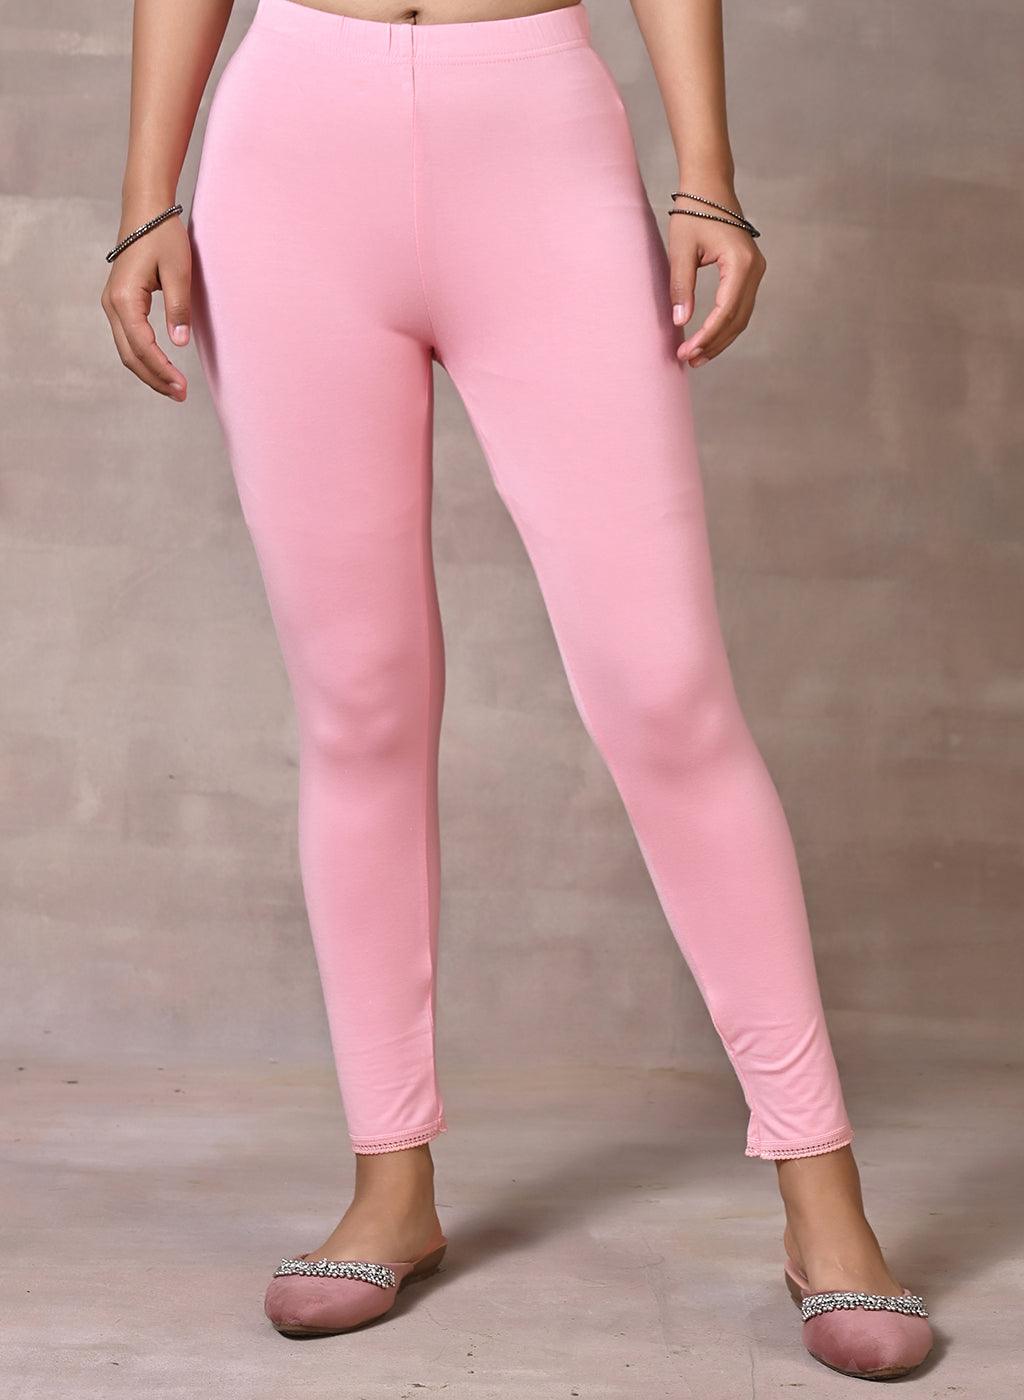 LESTIGE Pull-On Jeggings for Women Real Looking India